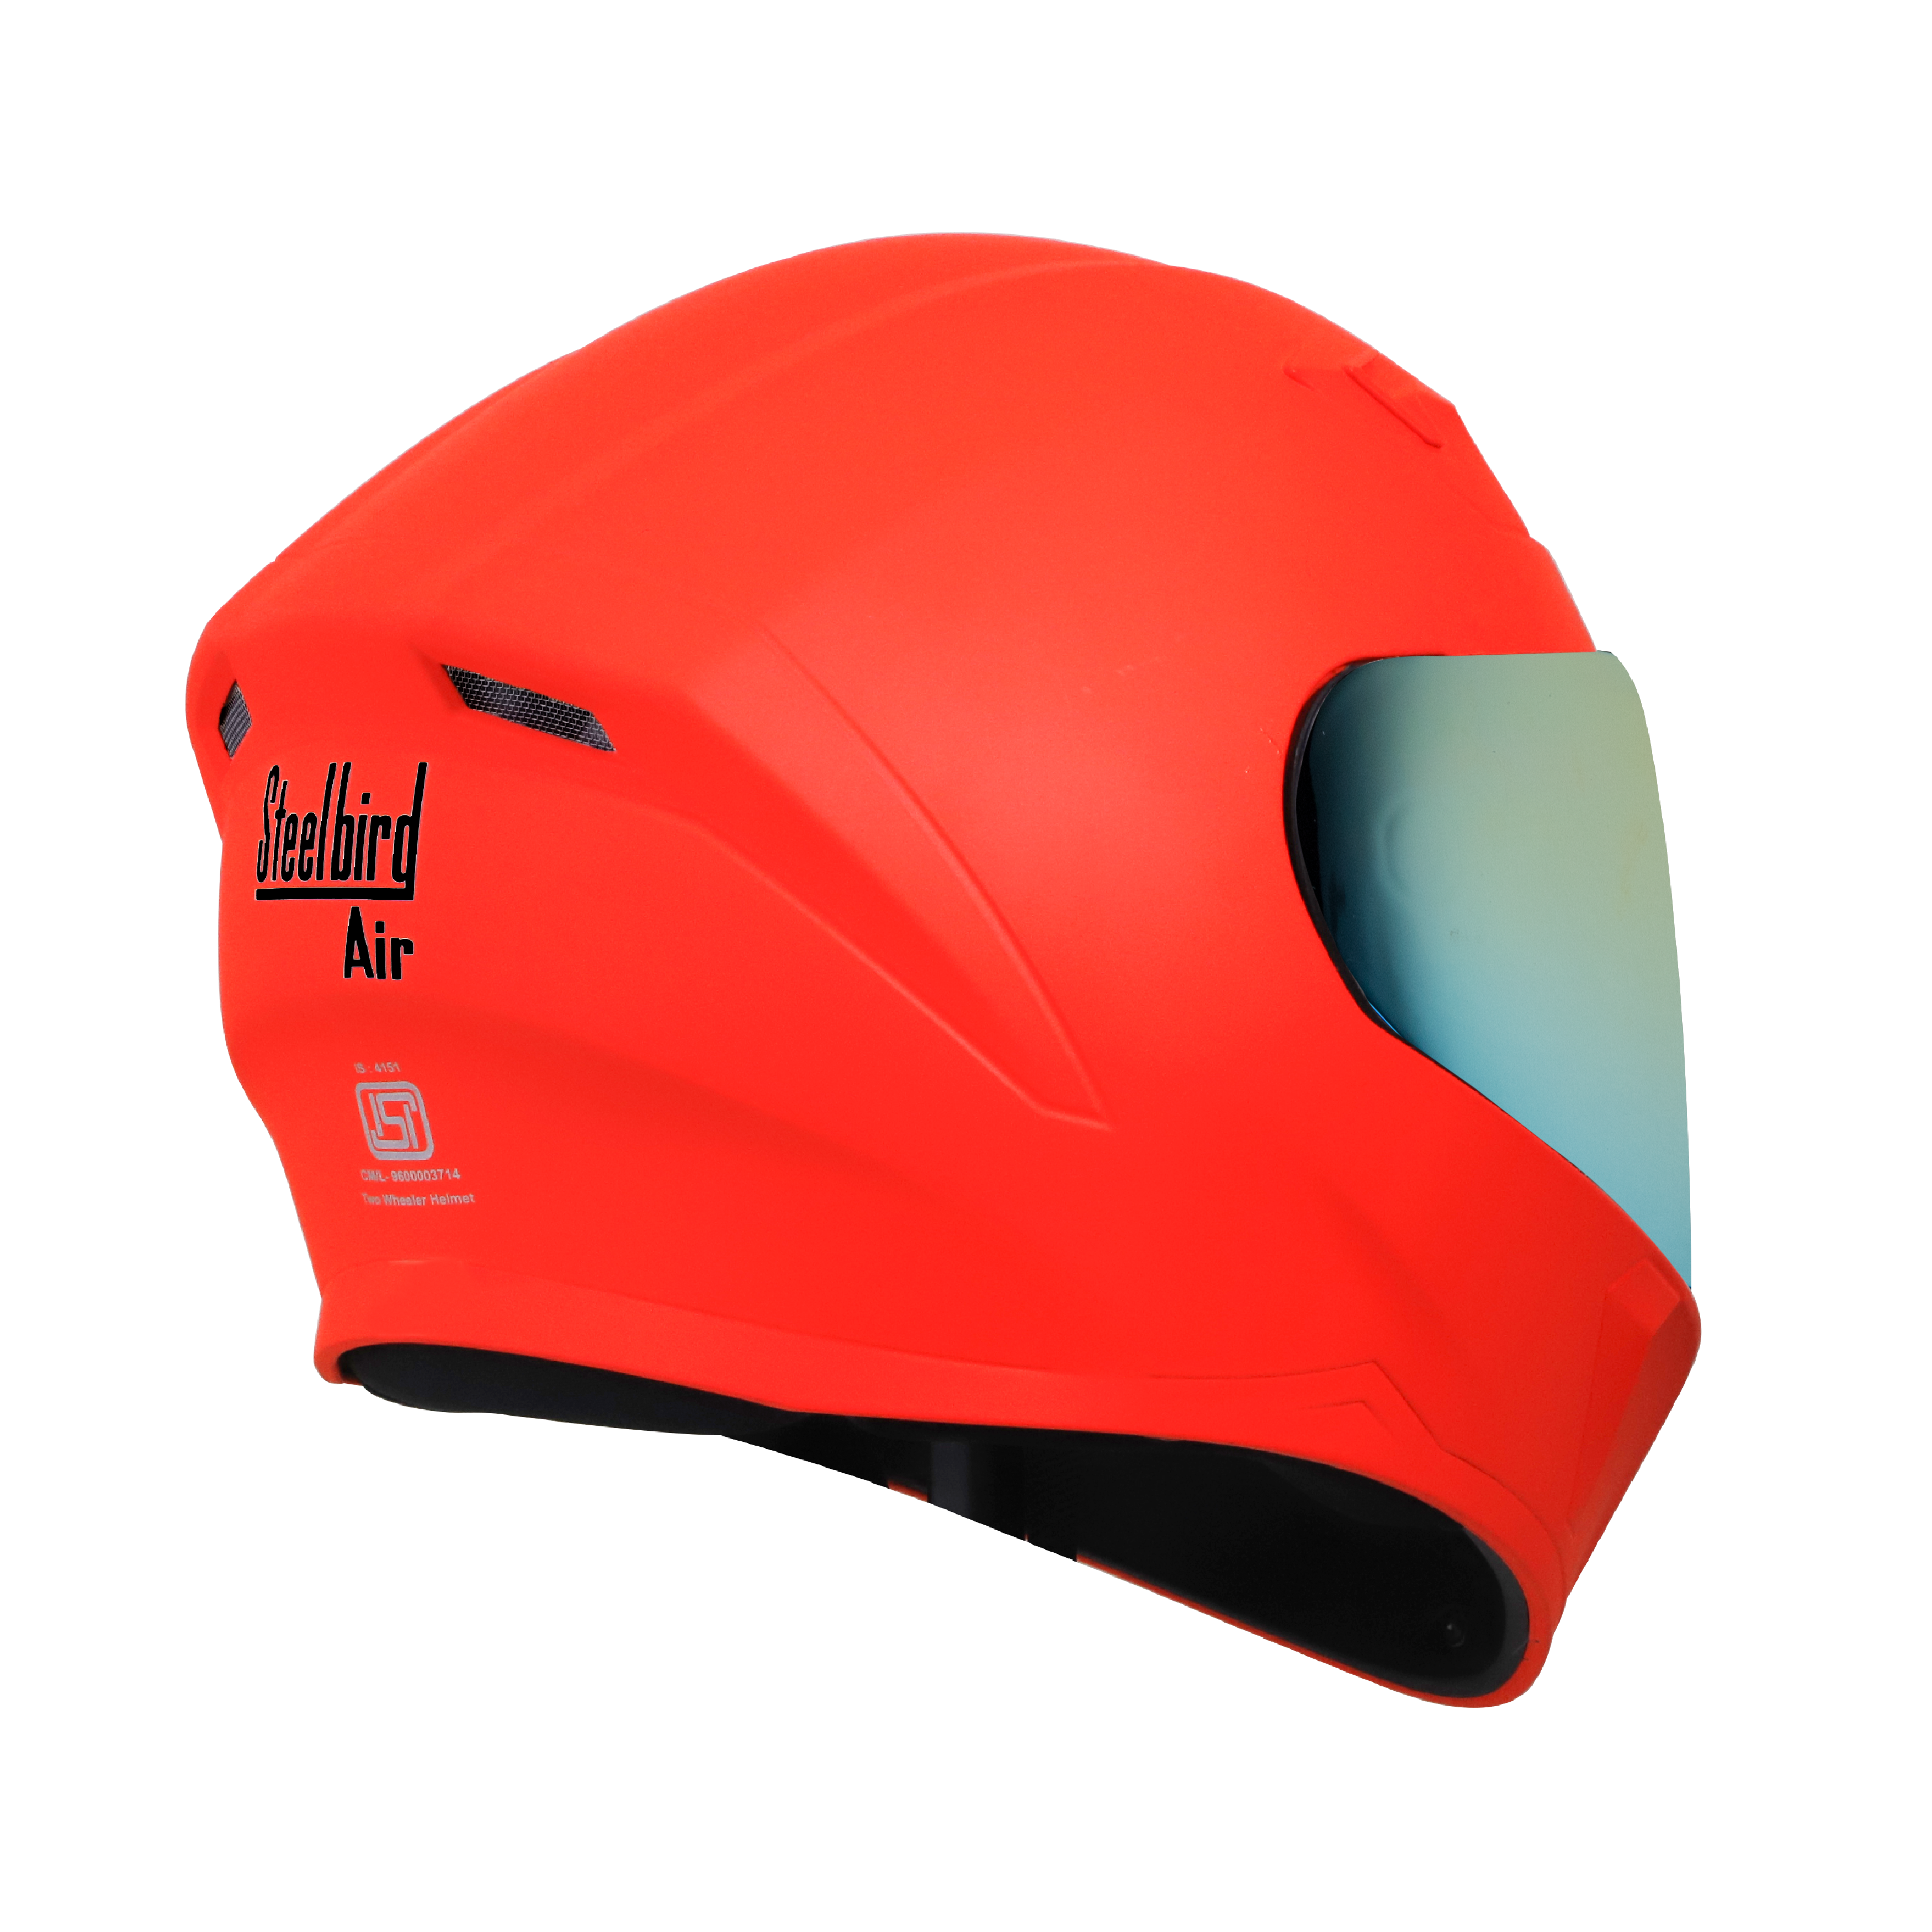 Steelbird SBA-21 GT Full Face ISI Certified Helmet (Glossy Fluo Red With Chrome Gold Visor)